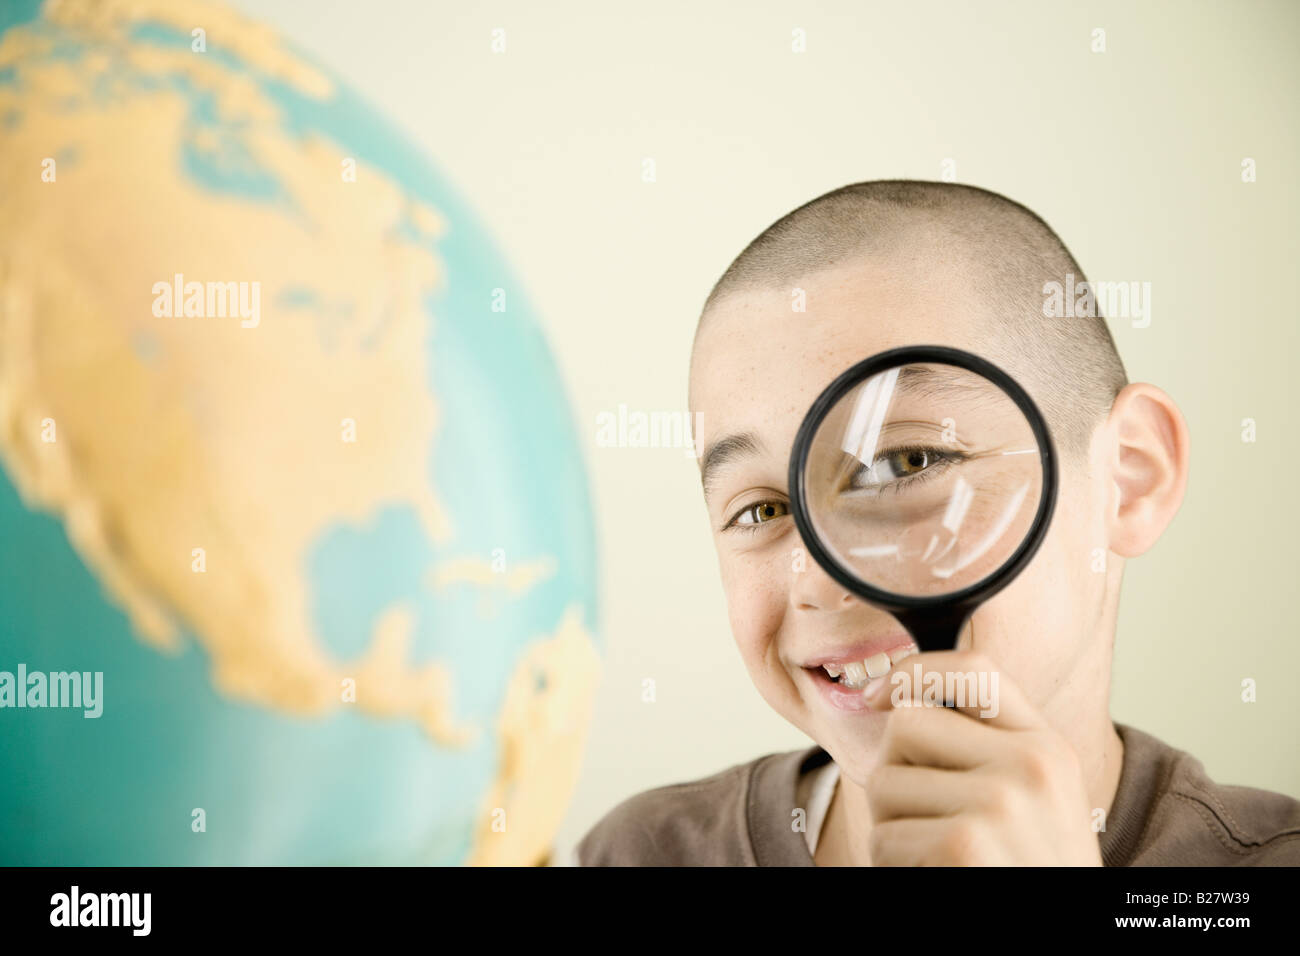 Boy looking through magnifying glass Stock Photo